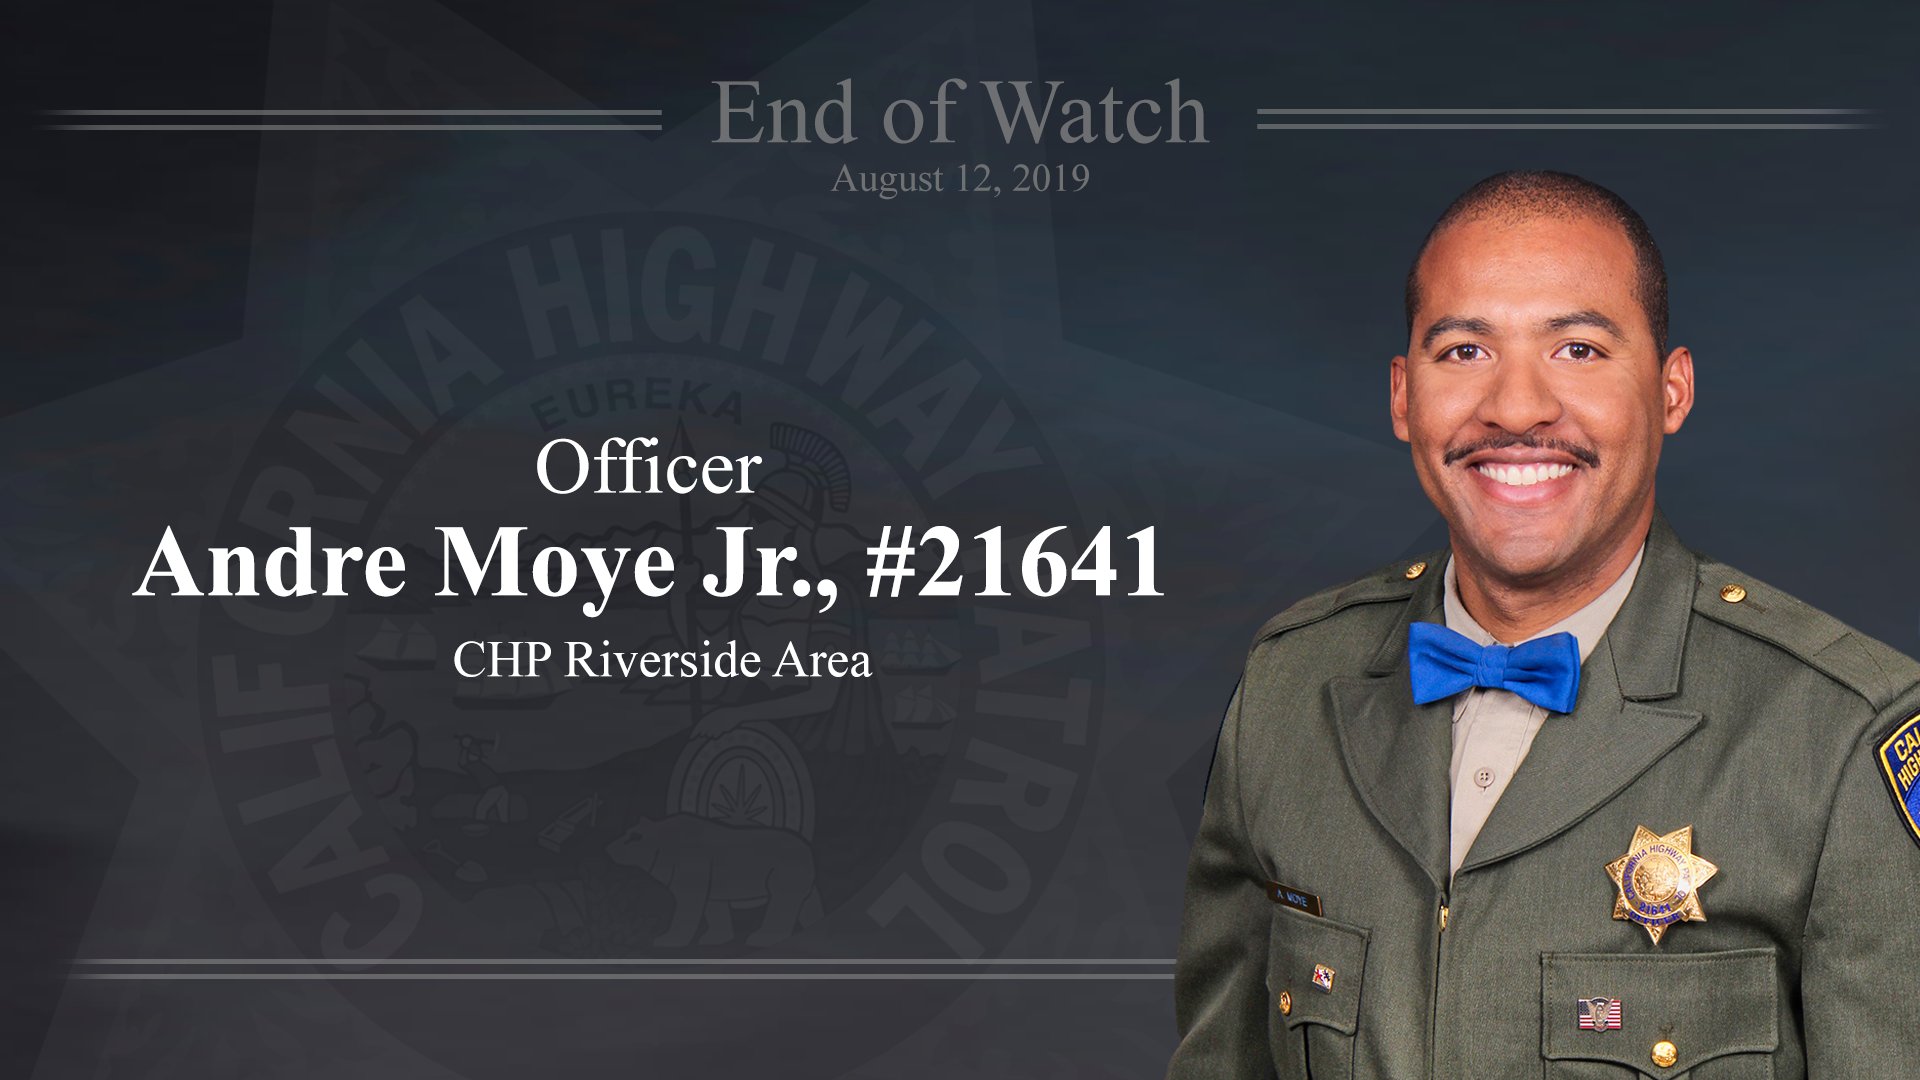 Fallen Hero Officer Andre Moye Jr., #21641 was tragically killed in the line of duty on August 12, 2019 in the Riverside area.